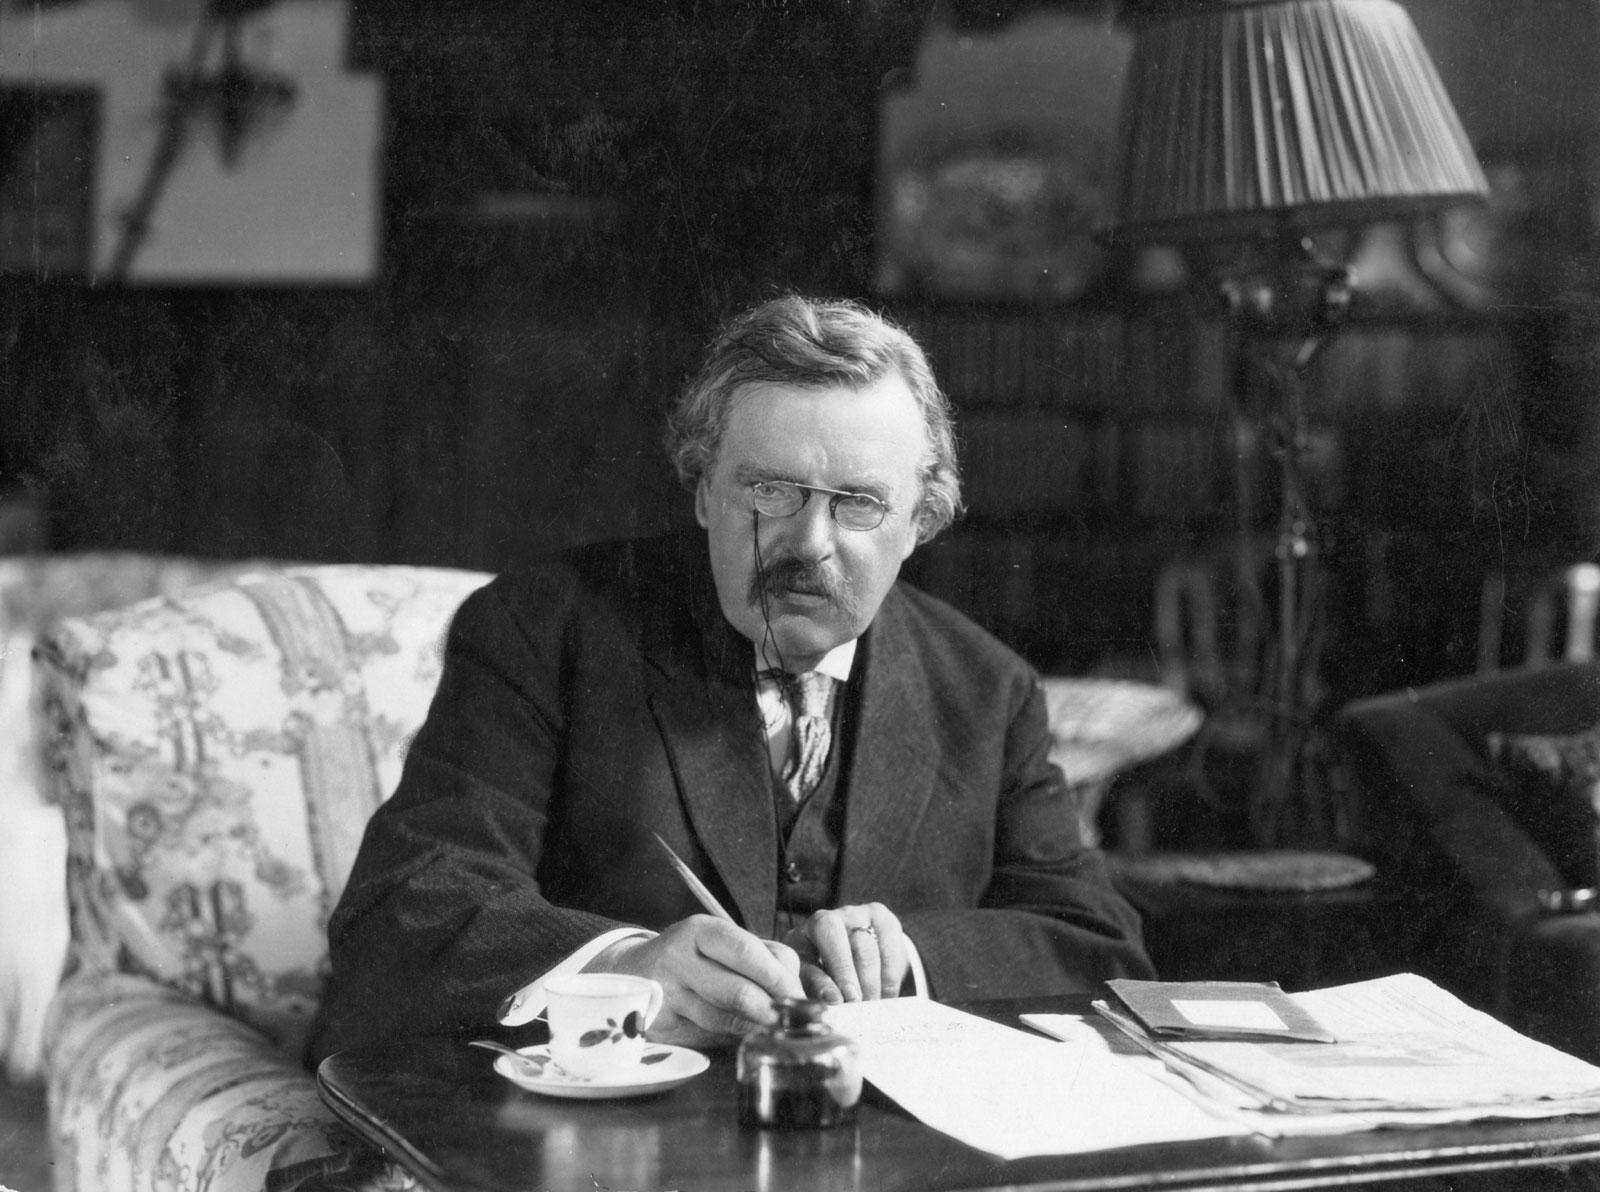 Chesterton: A Saint for the Rest of Us?